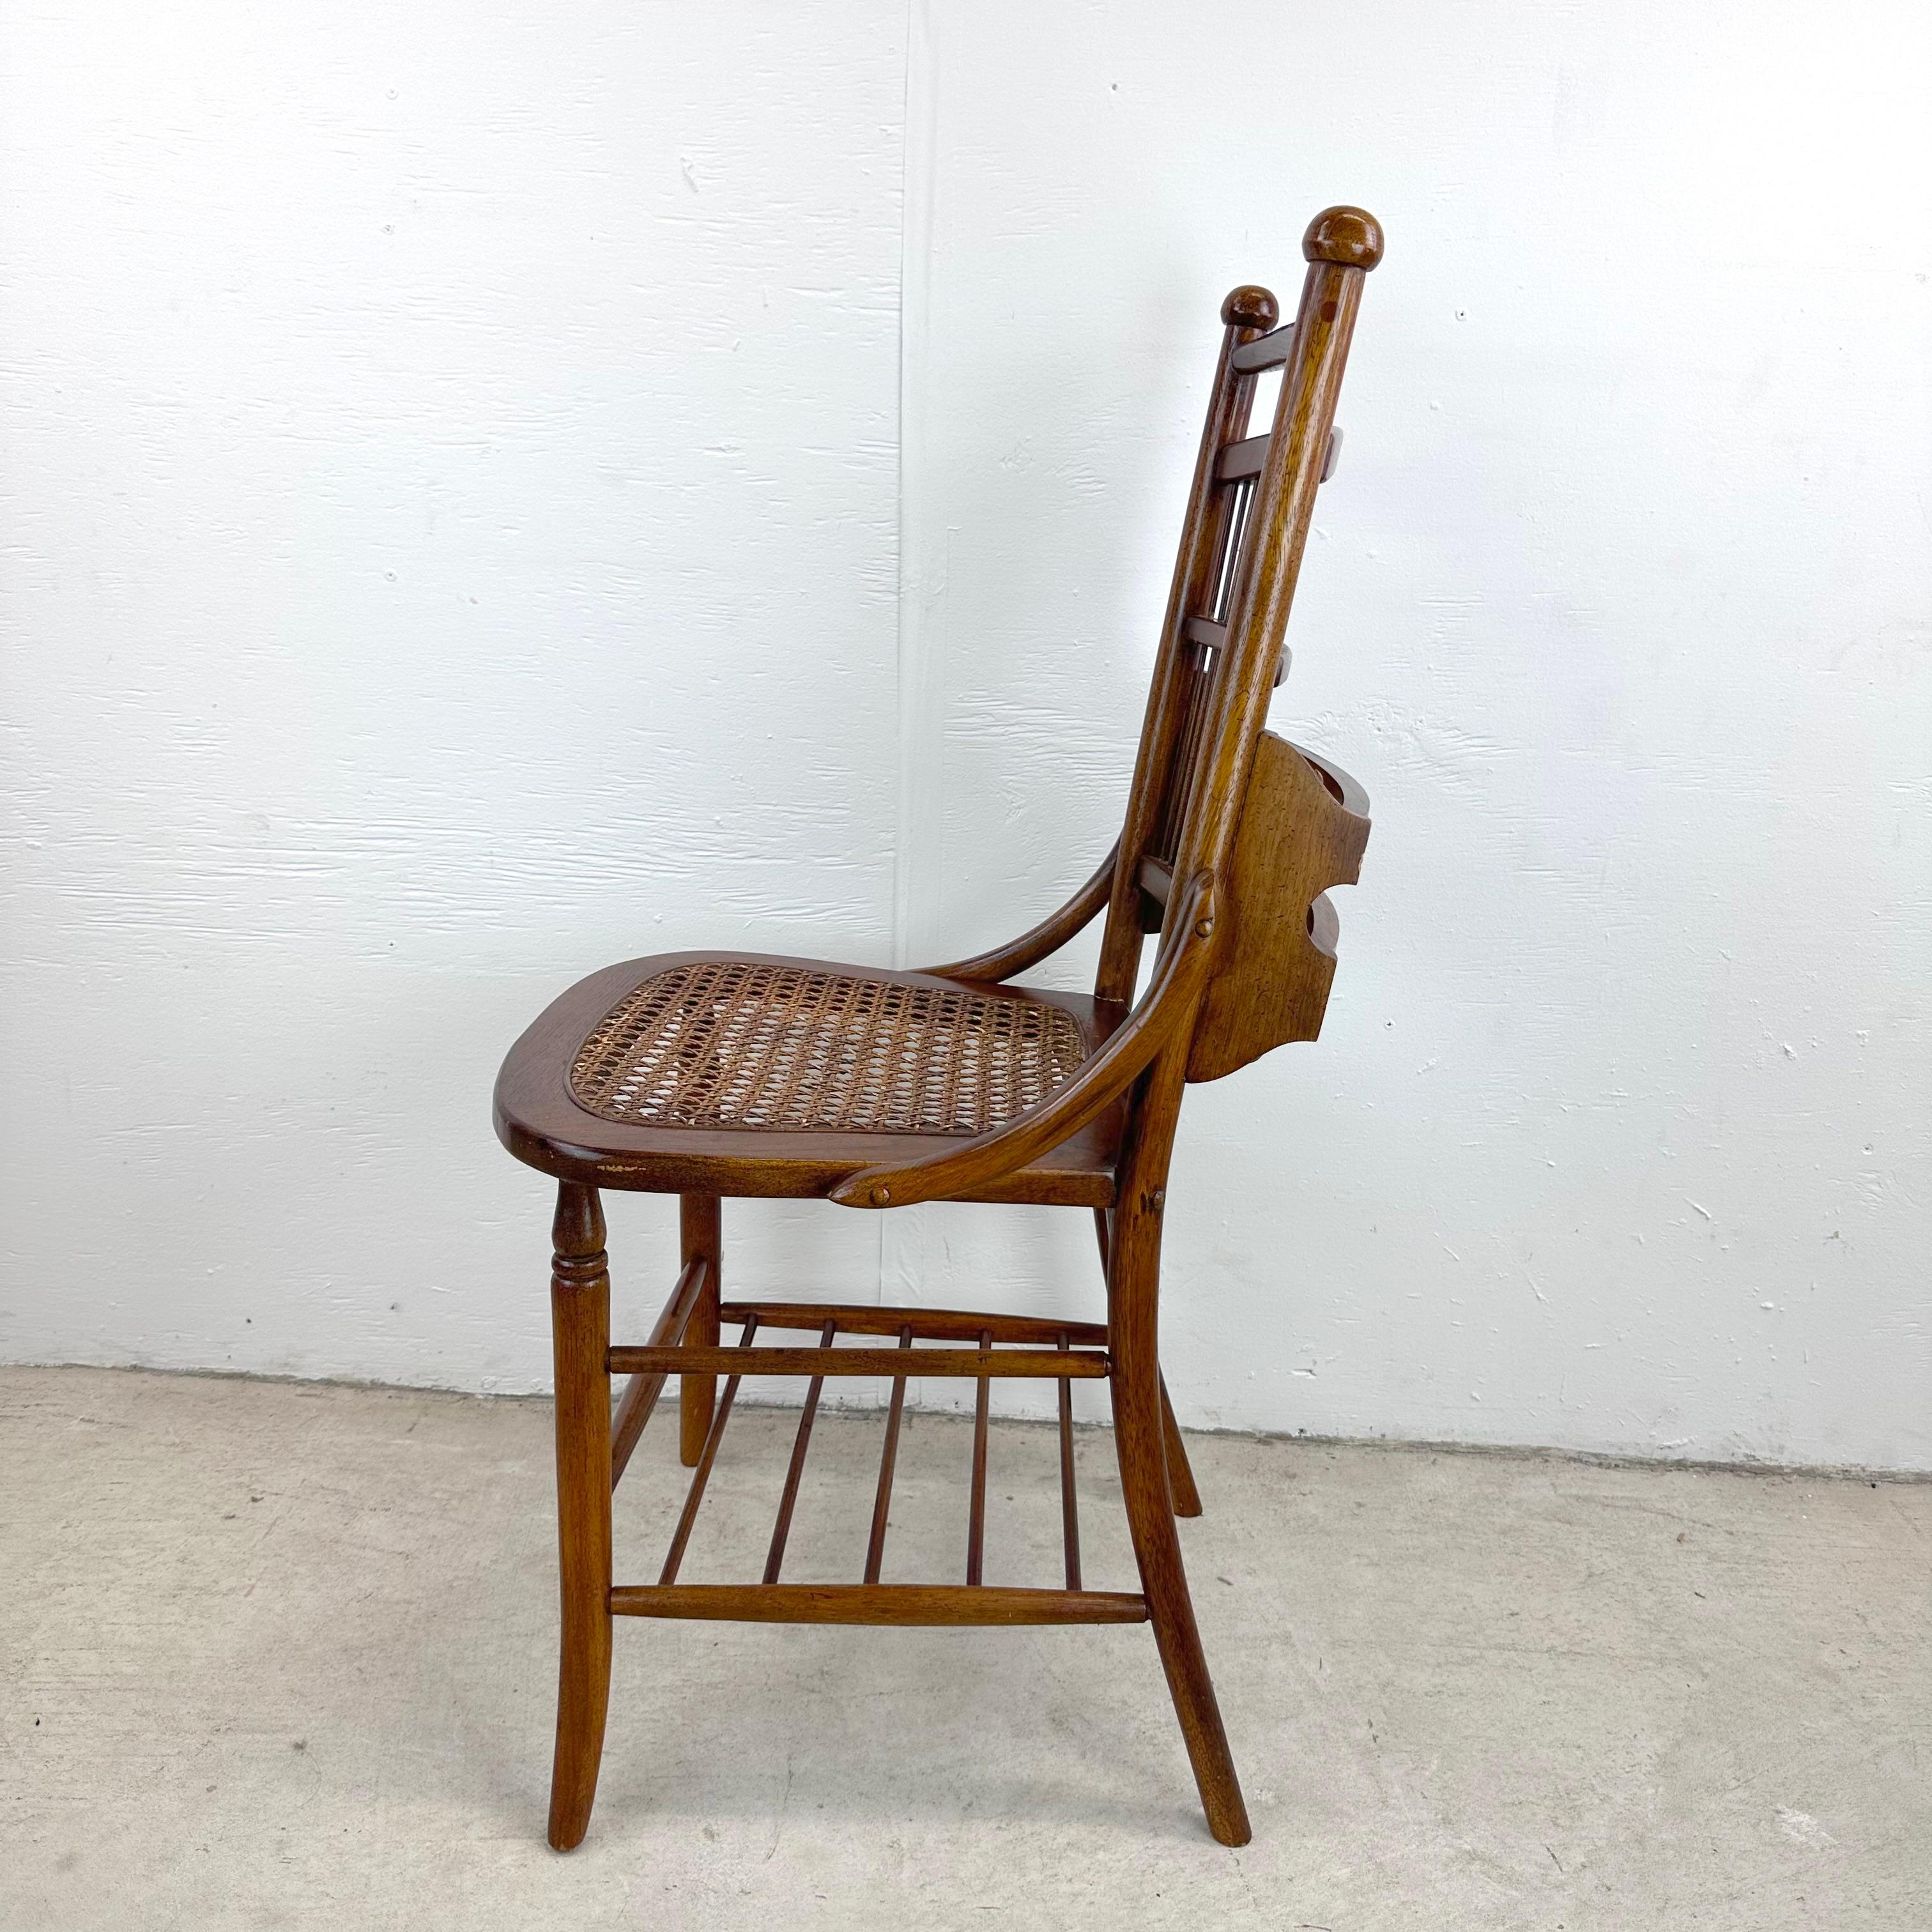 Other Antique Side Chair With Cane Seat and Spindle Back For Sale